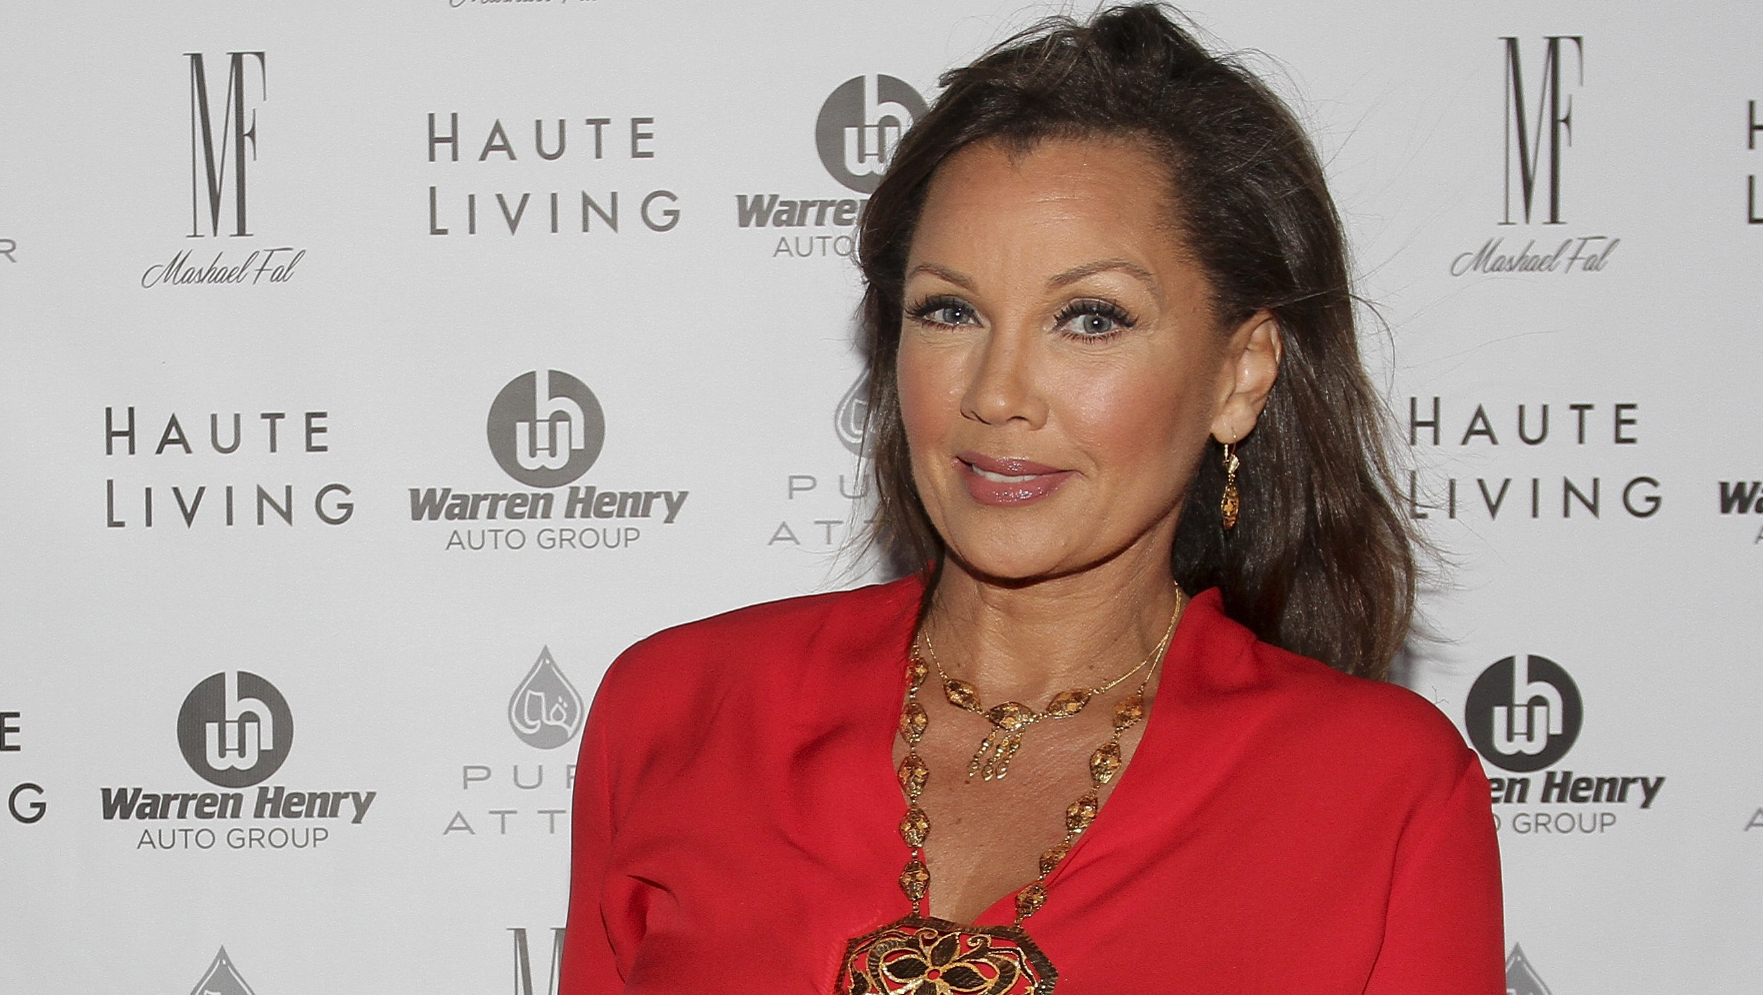 But of course: Queen Vanessa Williams returns to Miss 